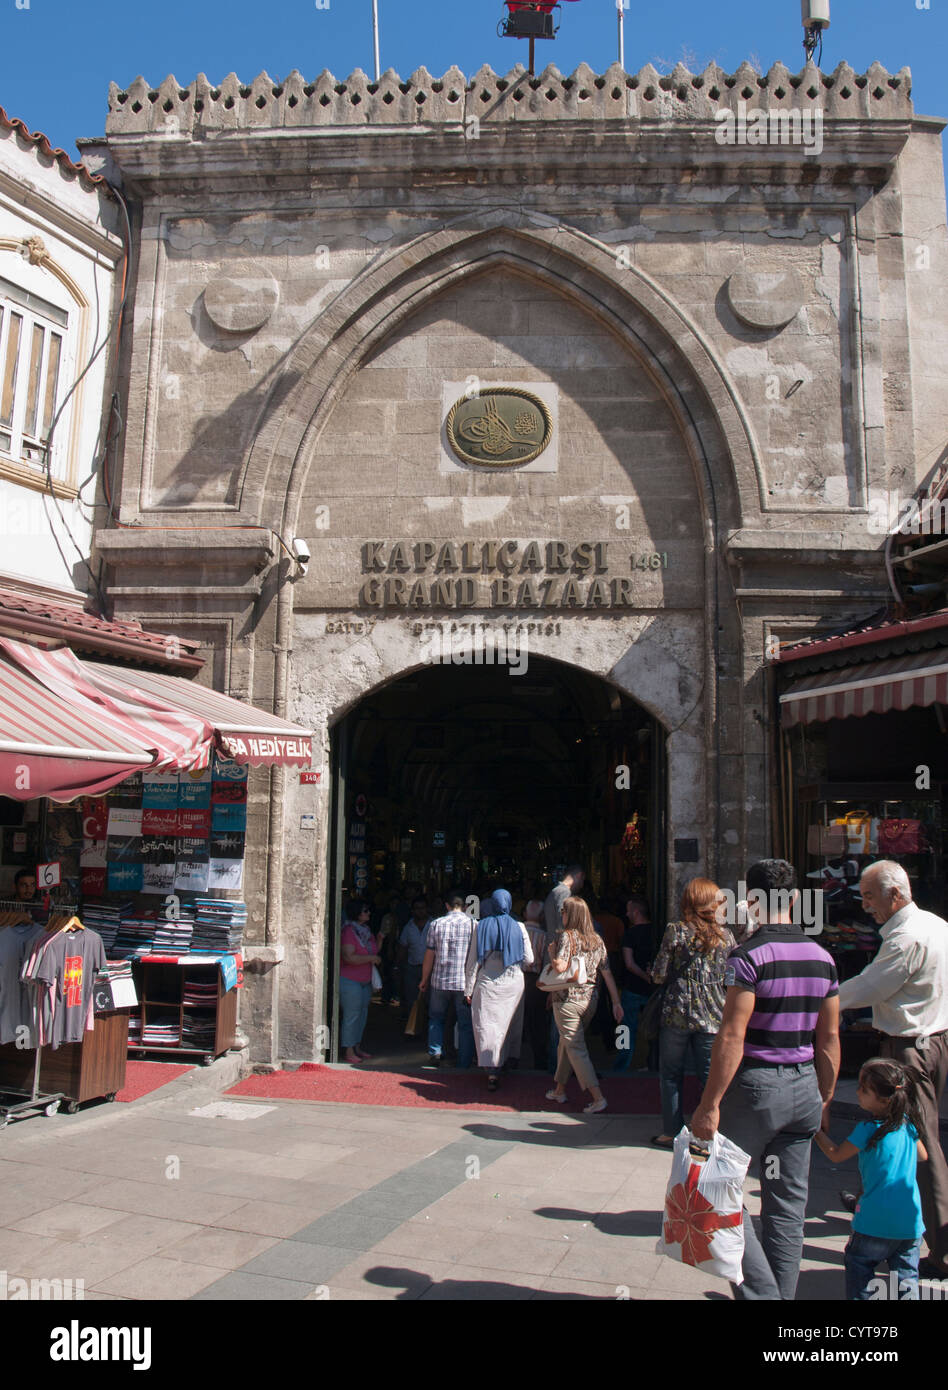 Kapalicarsi, Grand Bazaar or Covered market in Istanbul Turkeycaters to every tourist taste entrance gate Stock Photo